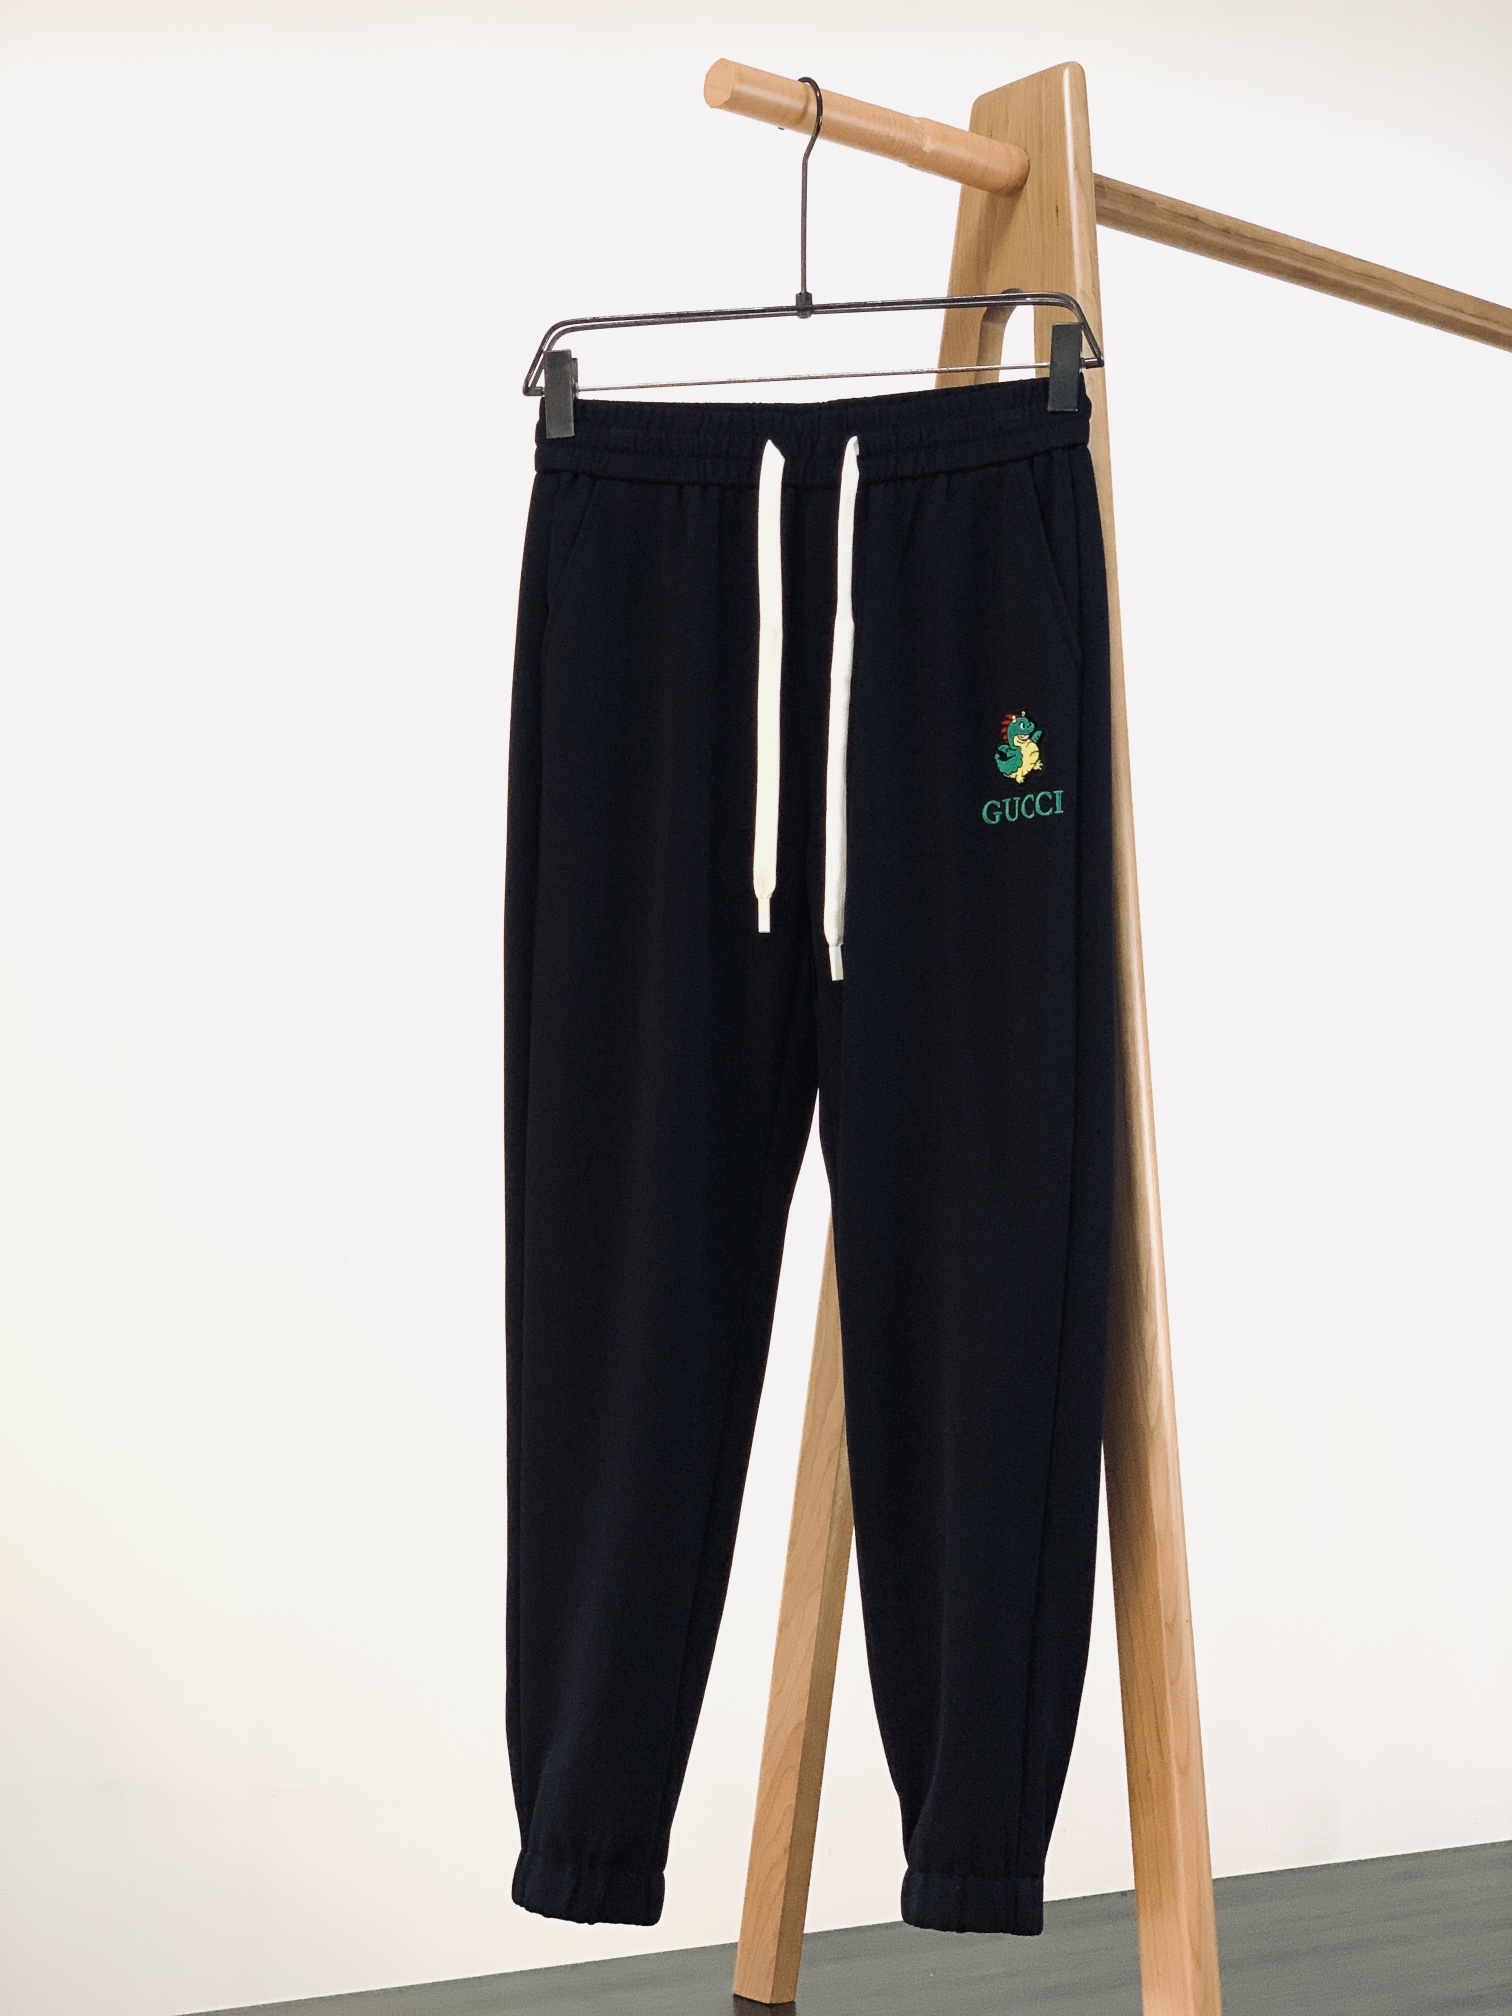 Gucci Clothing Pants & Trousers Spring Collection Fashion Casual